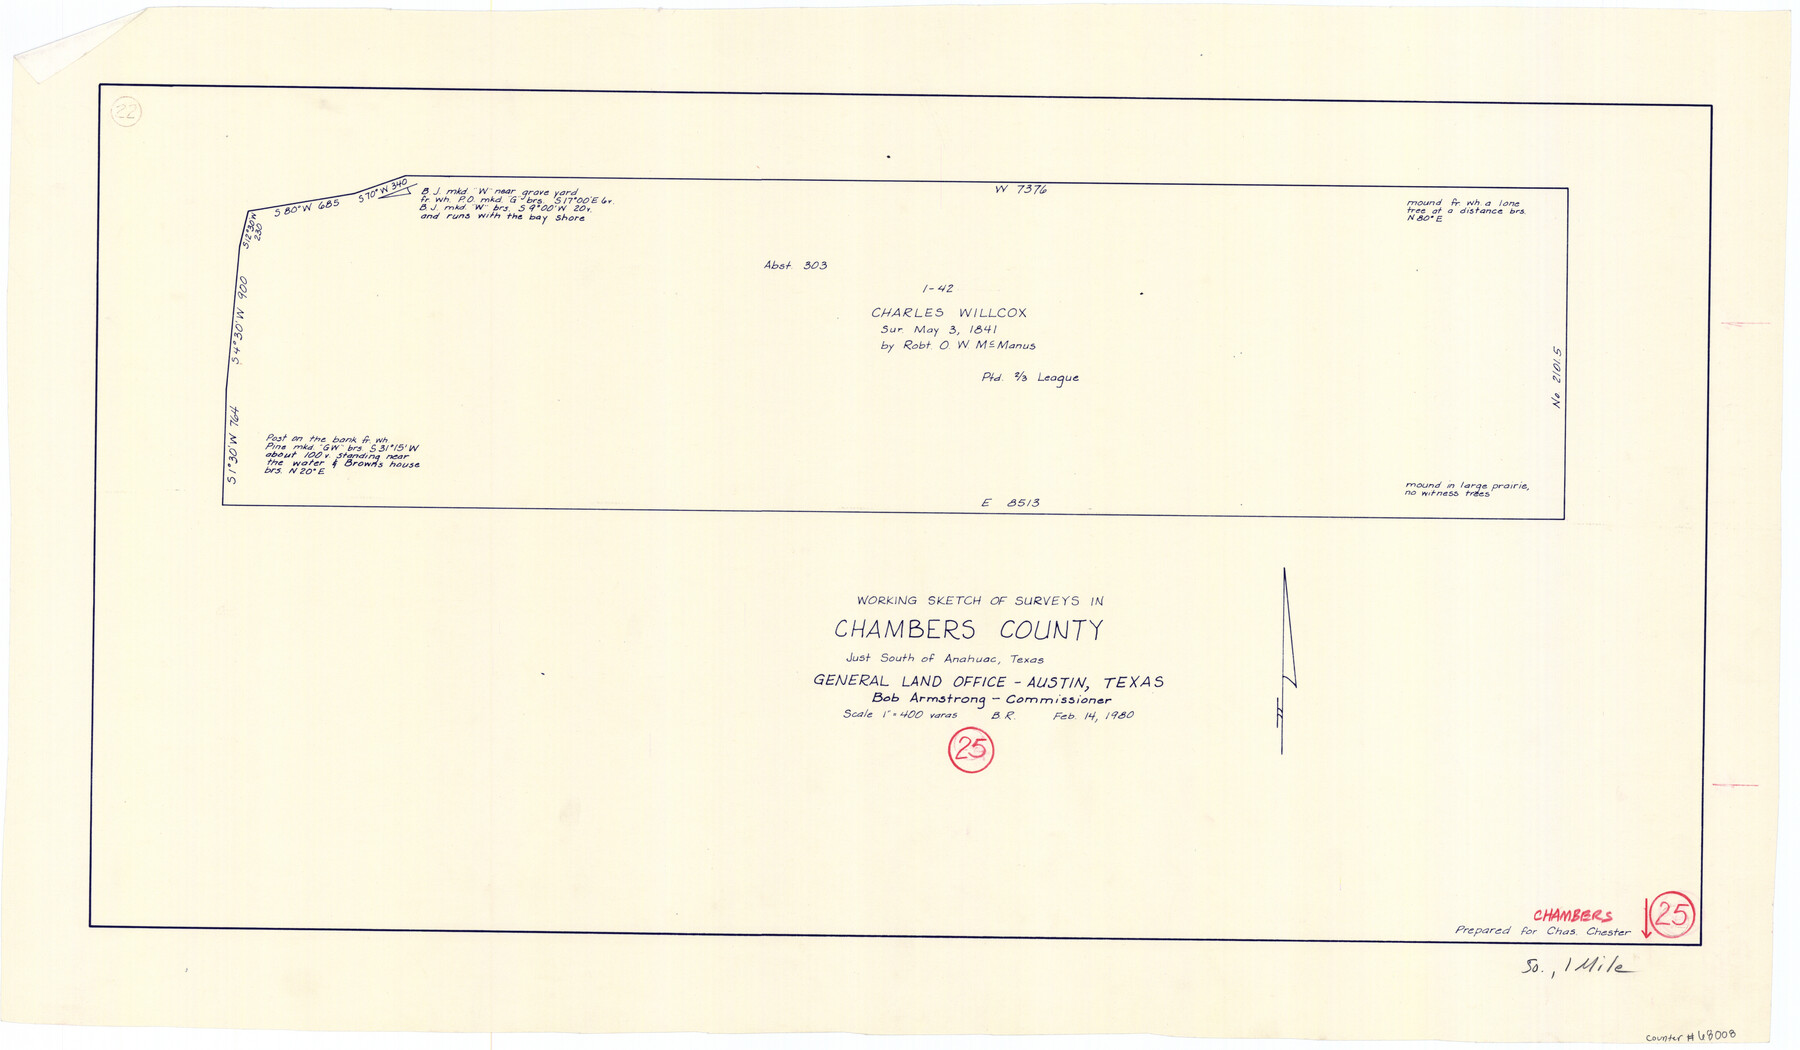 68008, Chambers County Working Sketch 25, General Map Collection